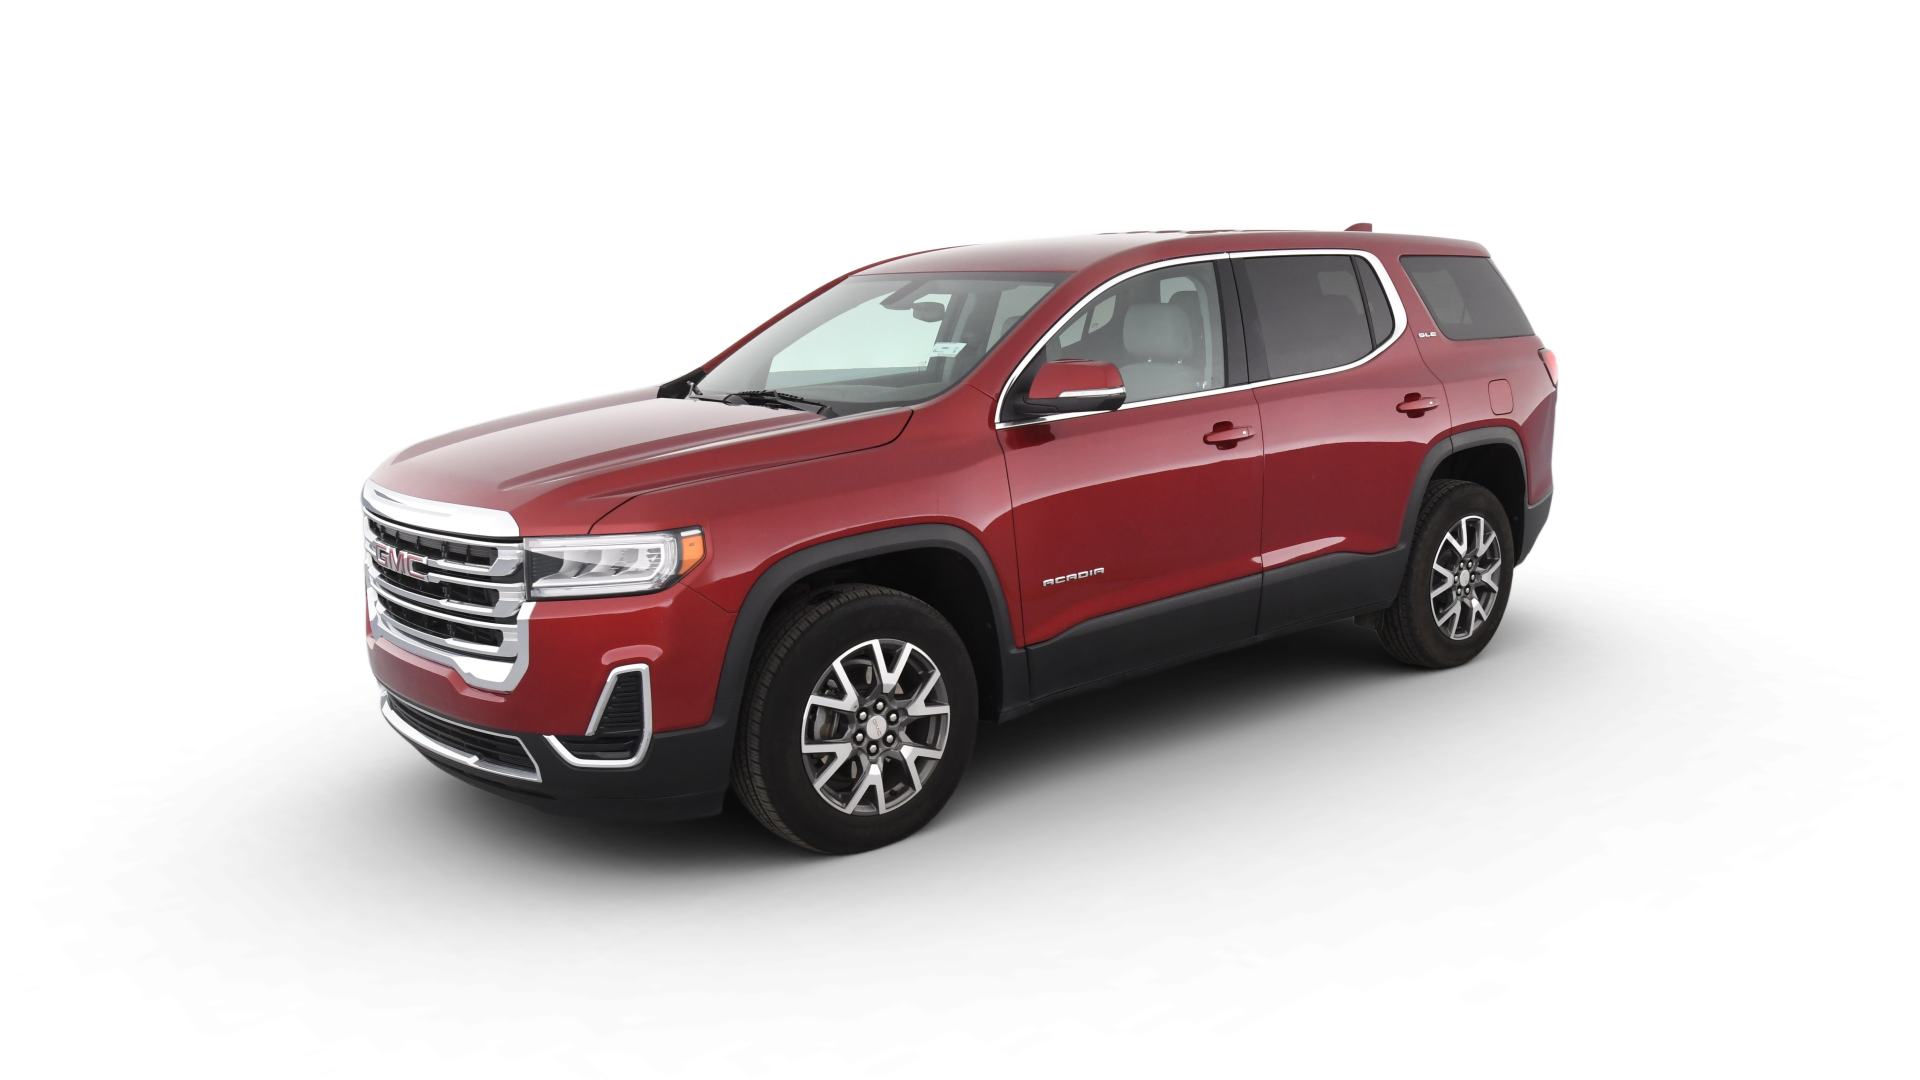 Used GMC Acadia for Sale: Buy Online & Delivery